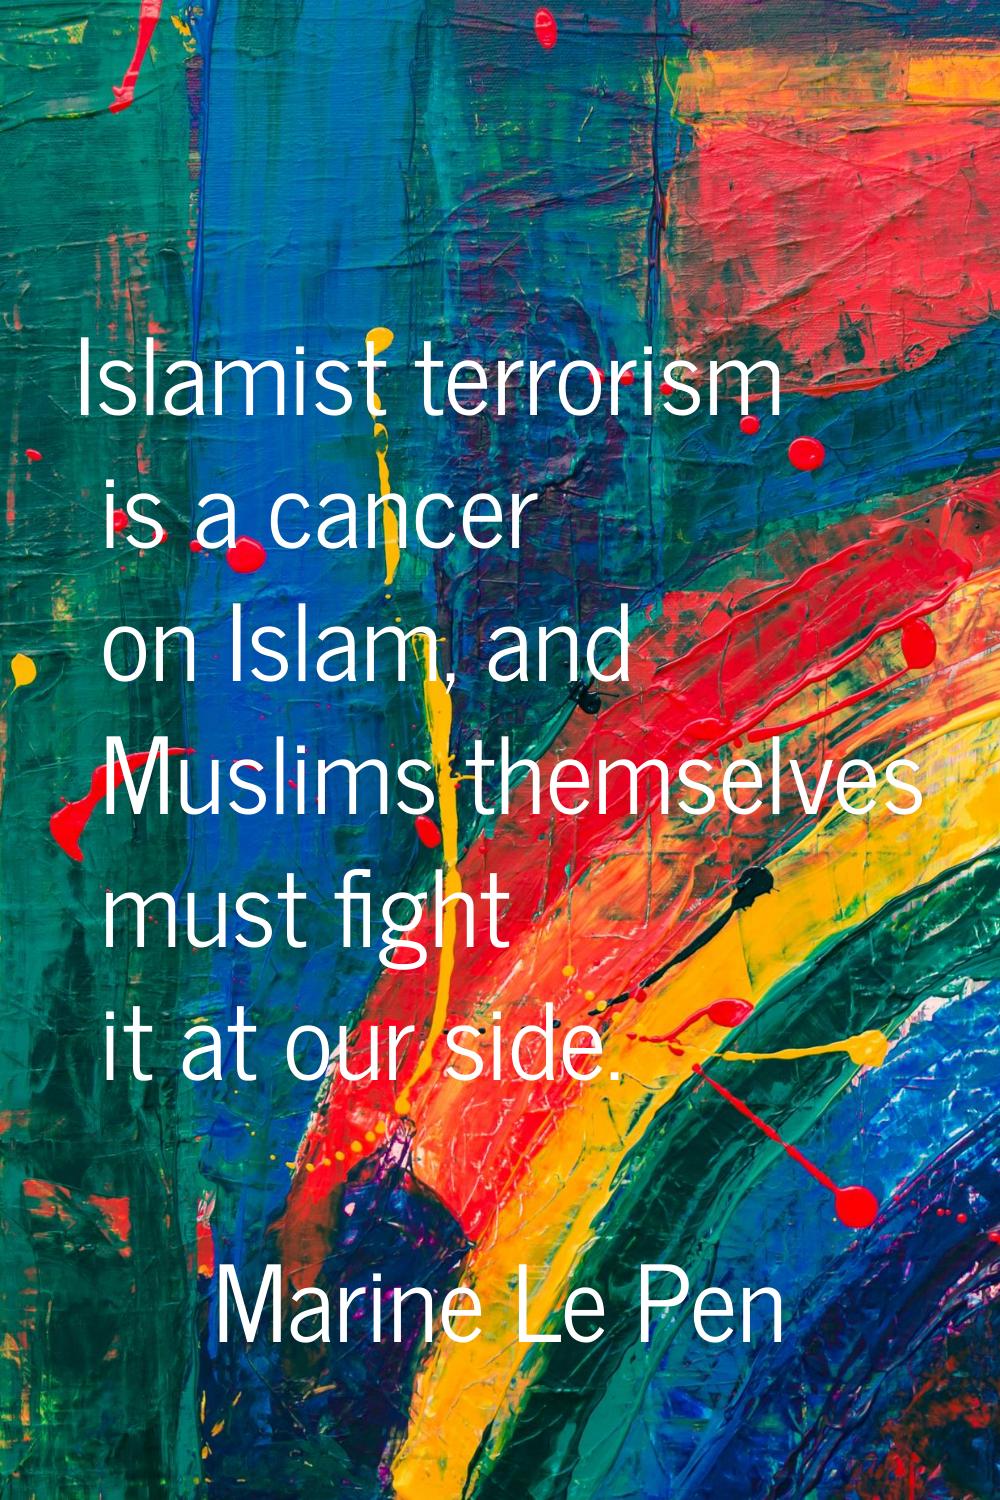 Islamist terrorism is a cancer on Islam, and Muslims themselves must fight it at our side.